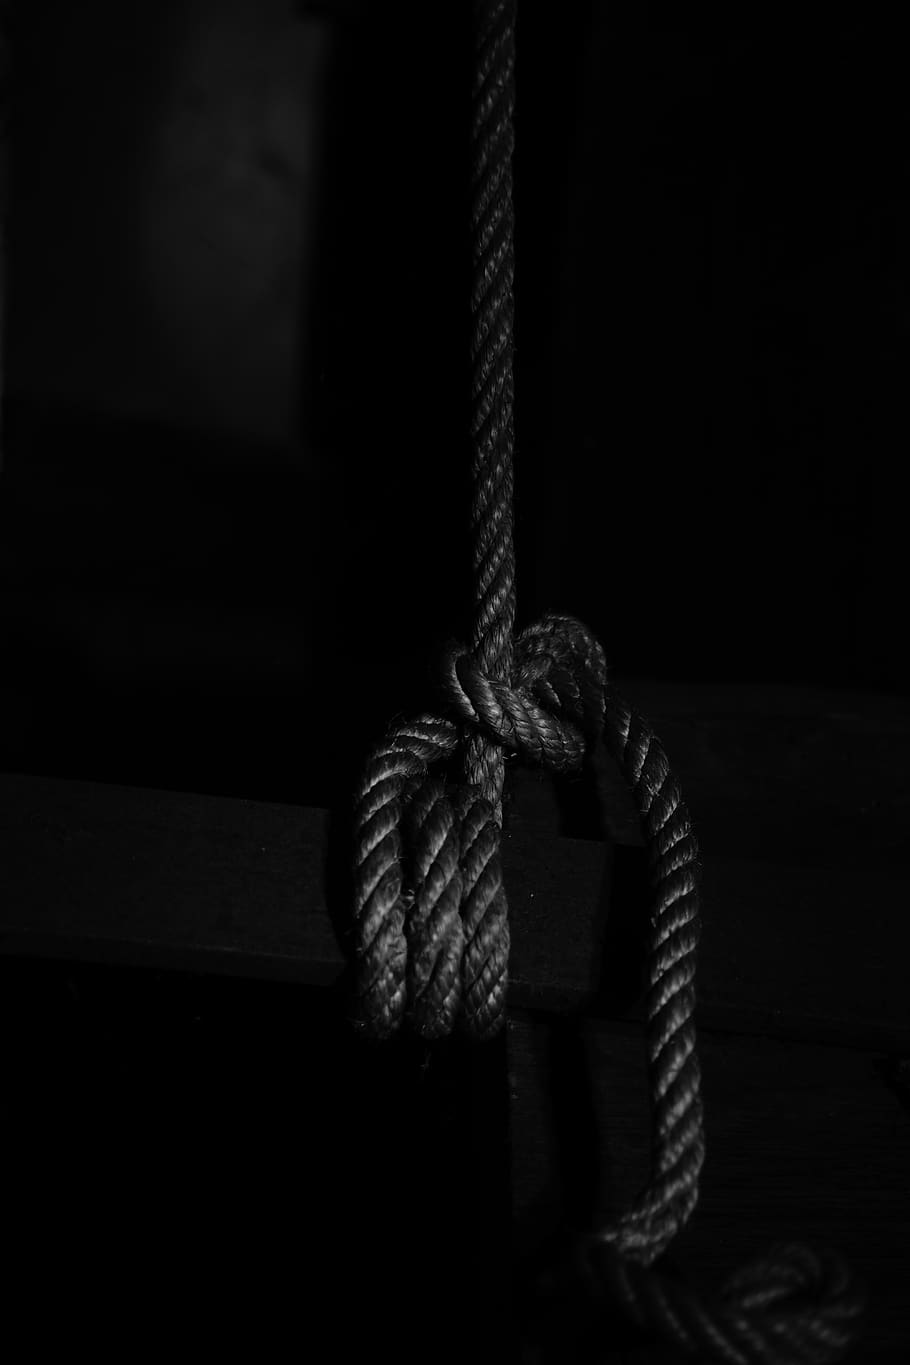 HD wallpaper: rope, knot, structure, connection, cordage